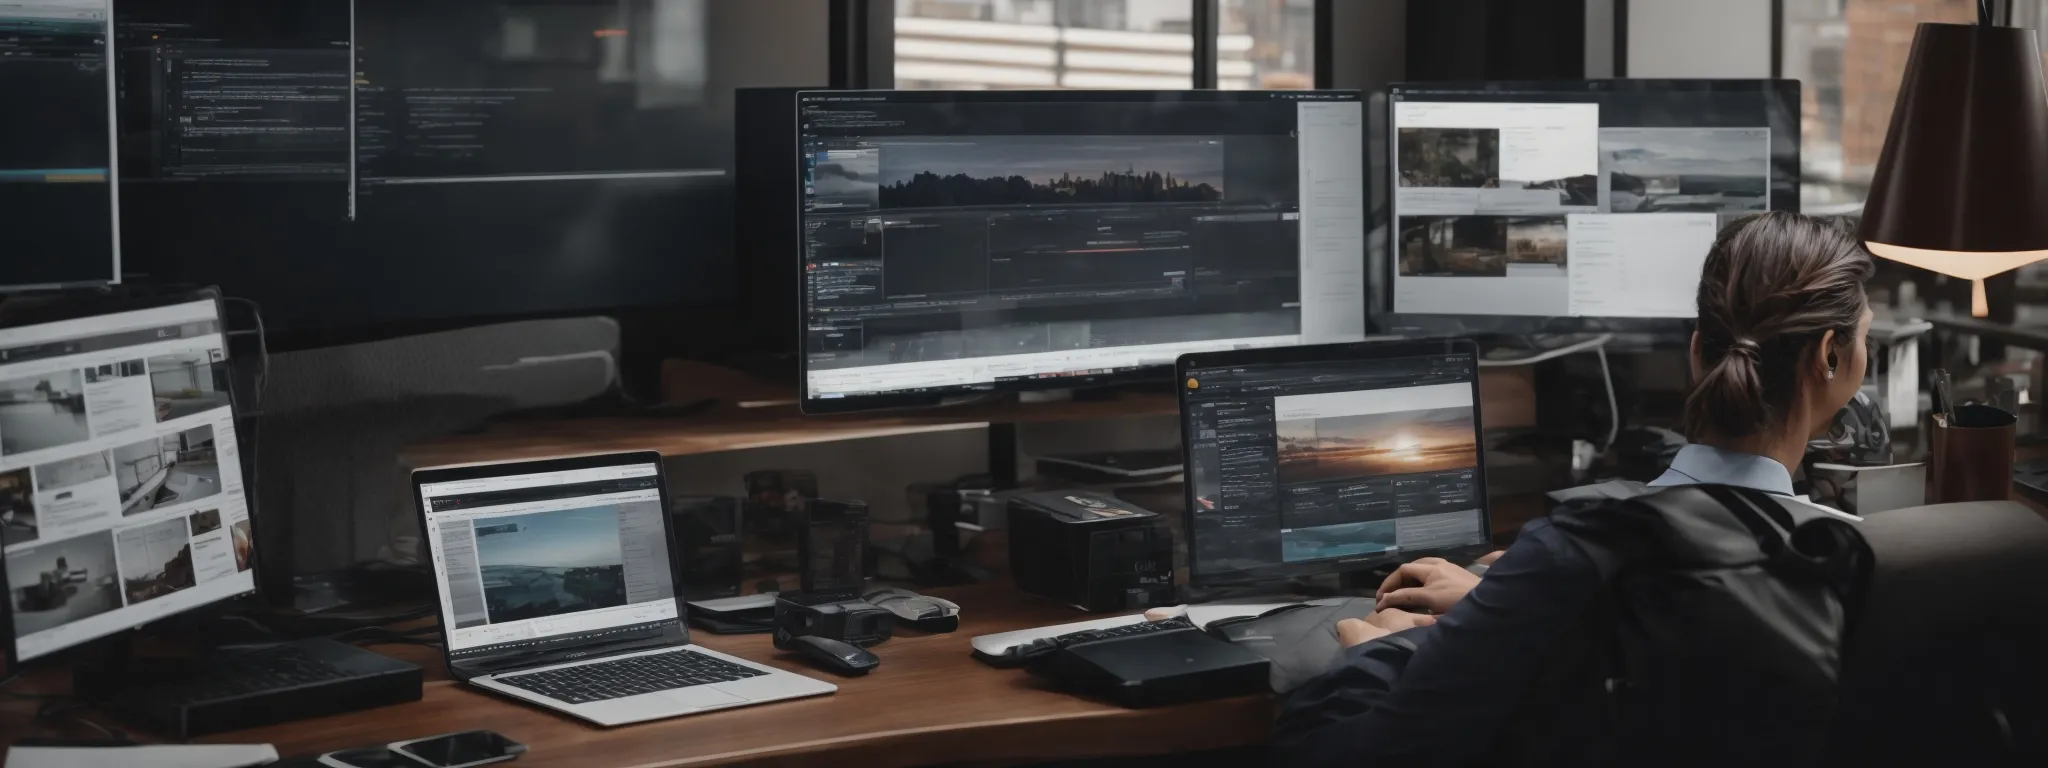 a marketer casually skimming through the latest seo news on a clutter-free, modern desk setup with dual monitors displaying analytics and a search engine results page.